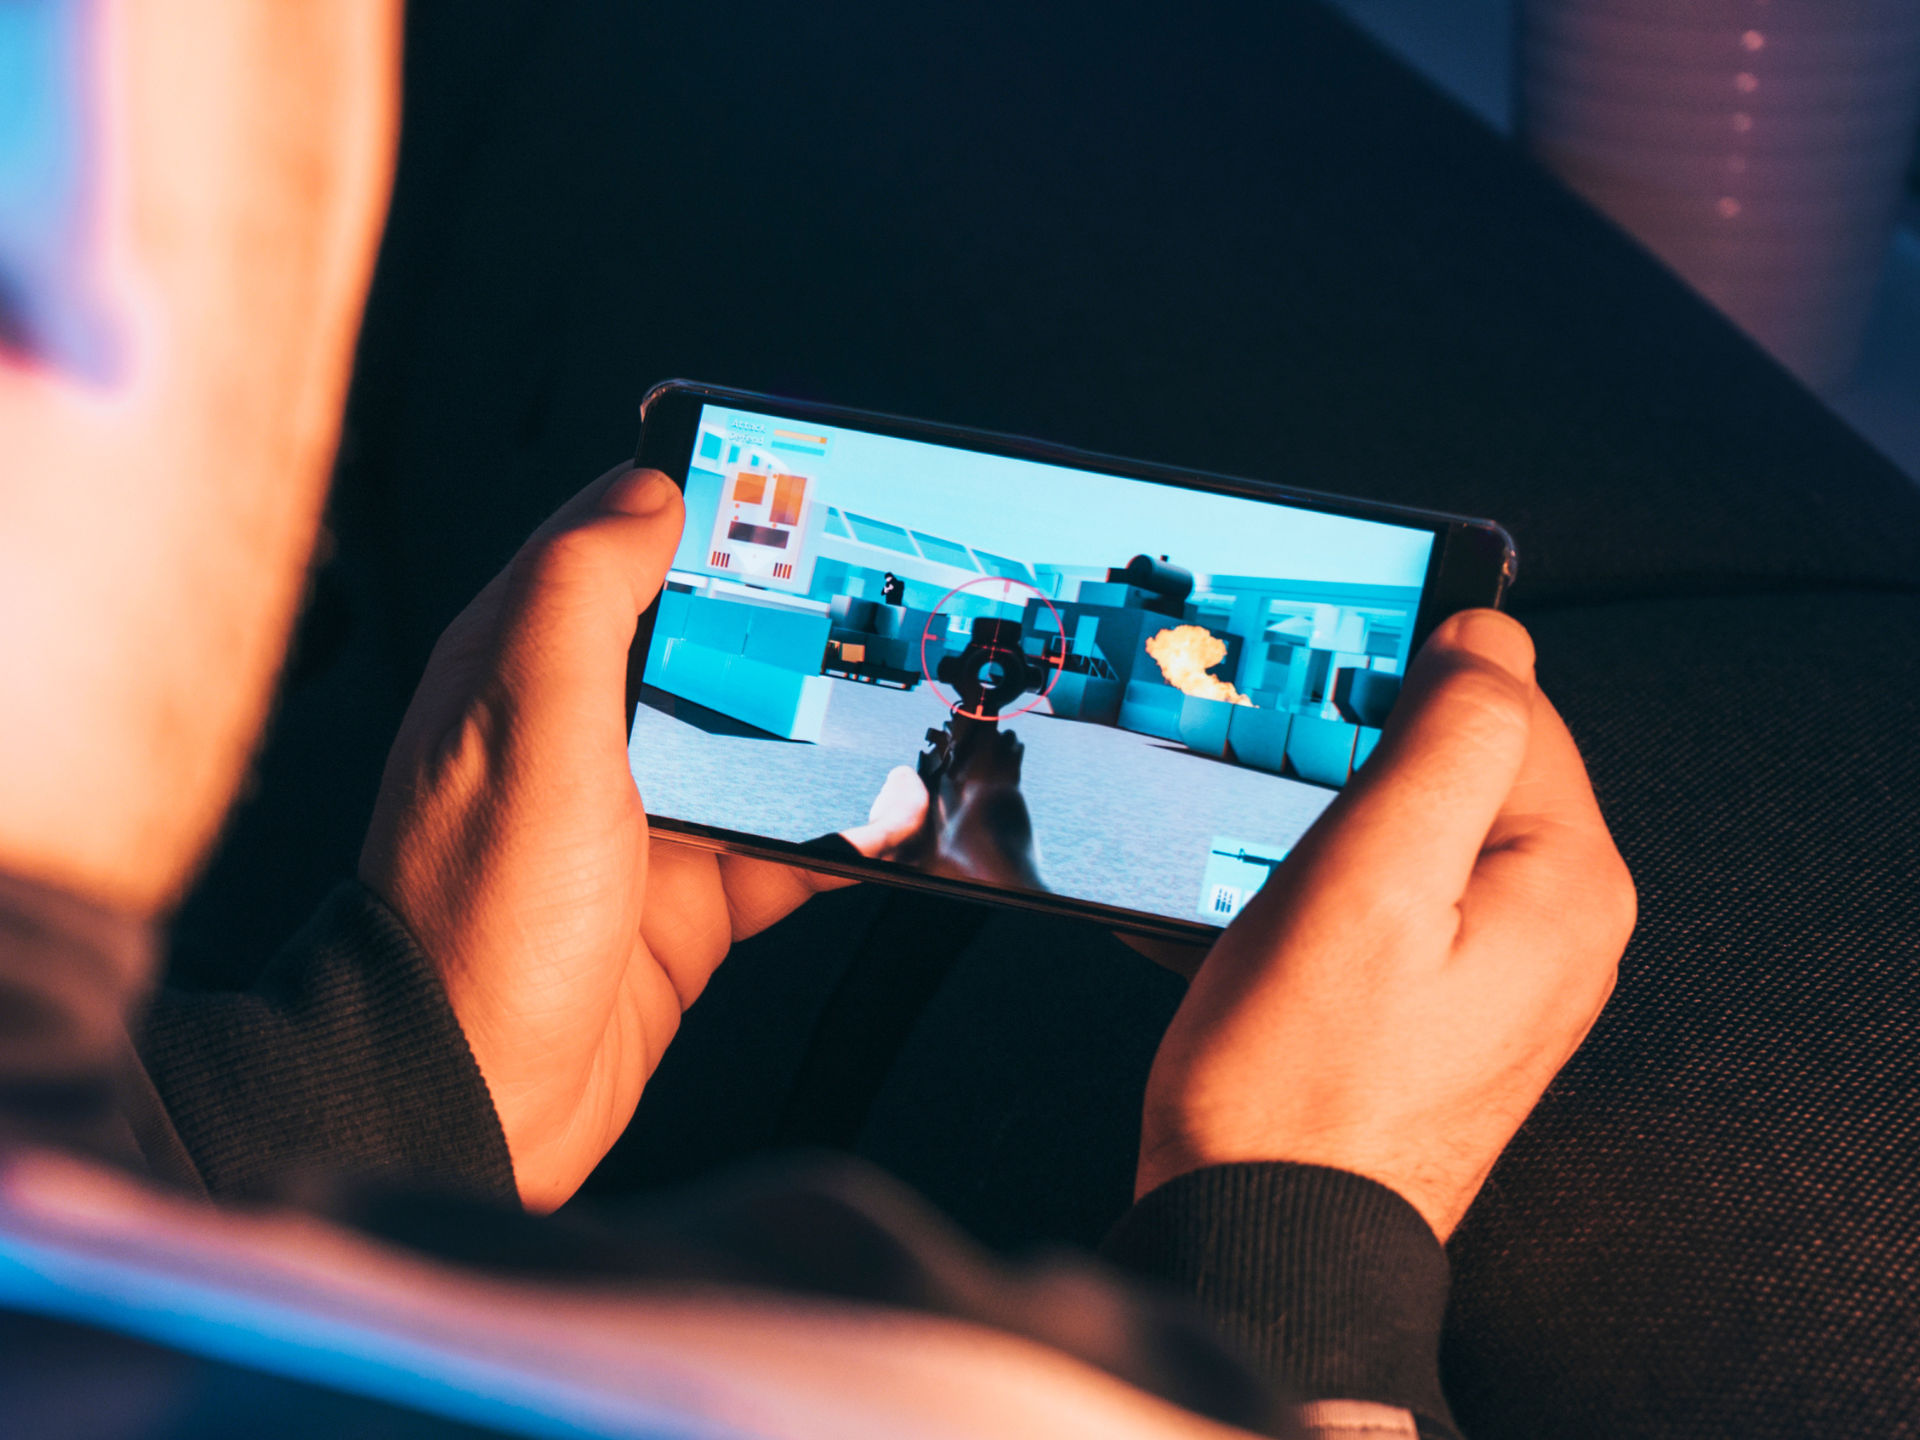 Best accessories for gaming on your smartphone